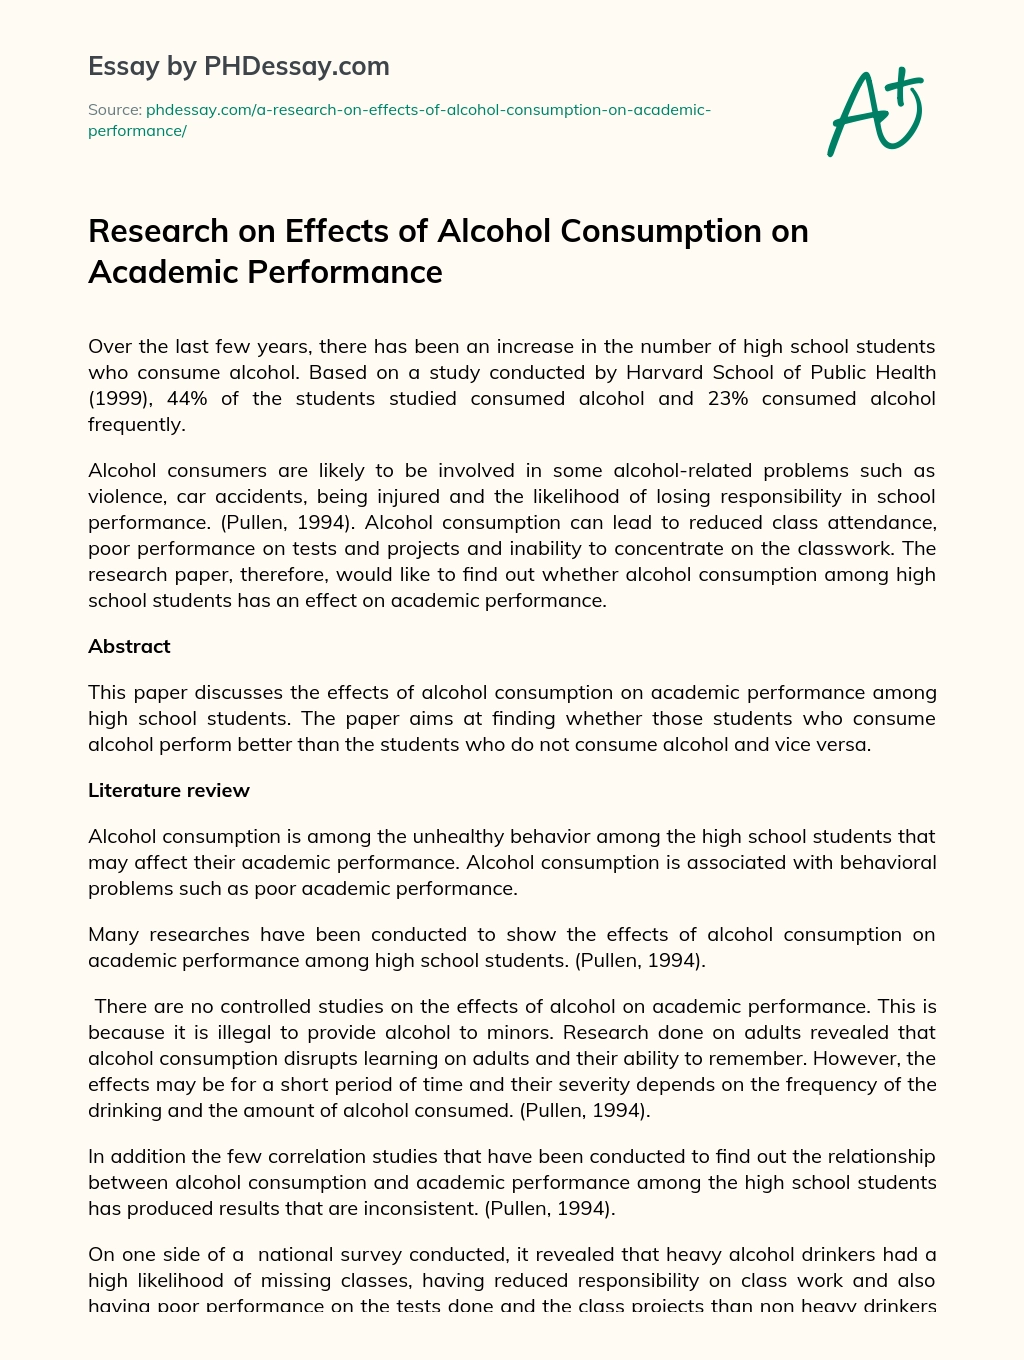 Research on Effects of Alcohol Consumption on Academic Performance essay